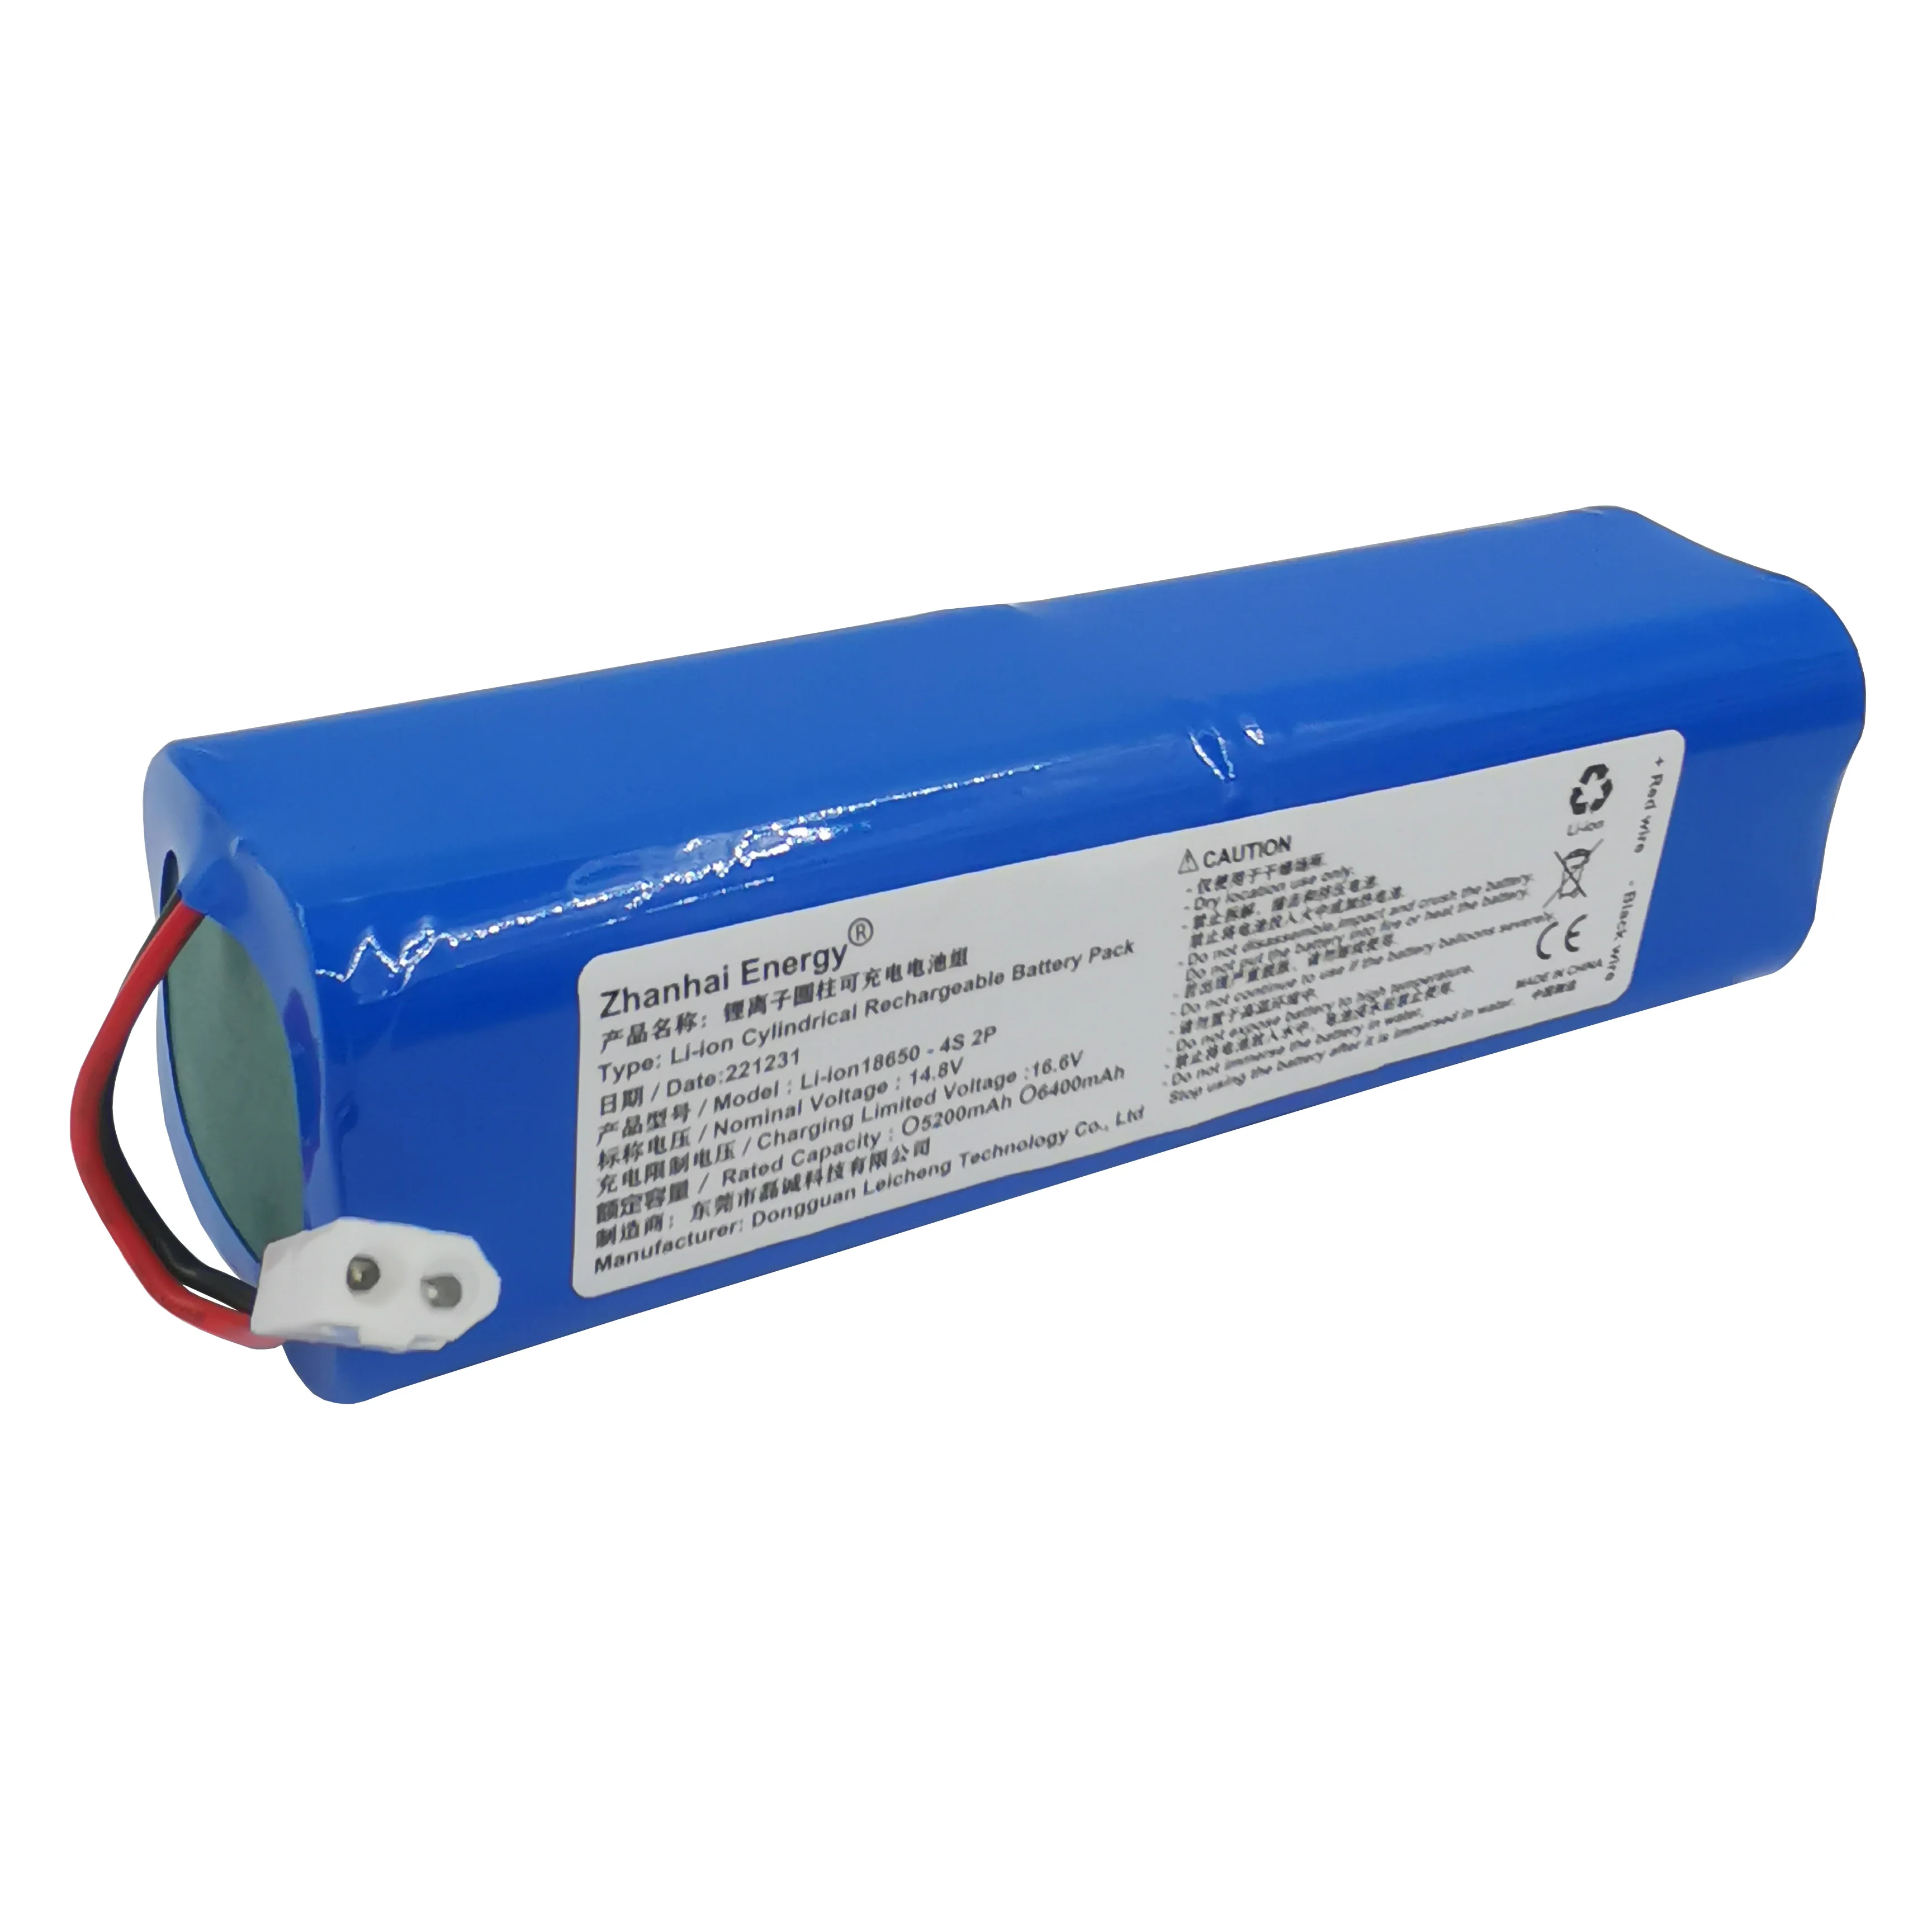 

14.4V 14.8V 5200mAh 6400mAh Li-Ion Cylindrical Rechargeable Battery Pack For 4S 2P Sweeping Robot Battery New Customizable